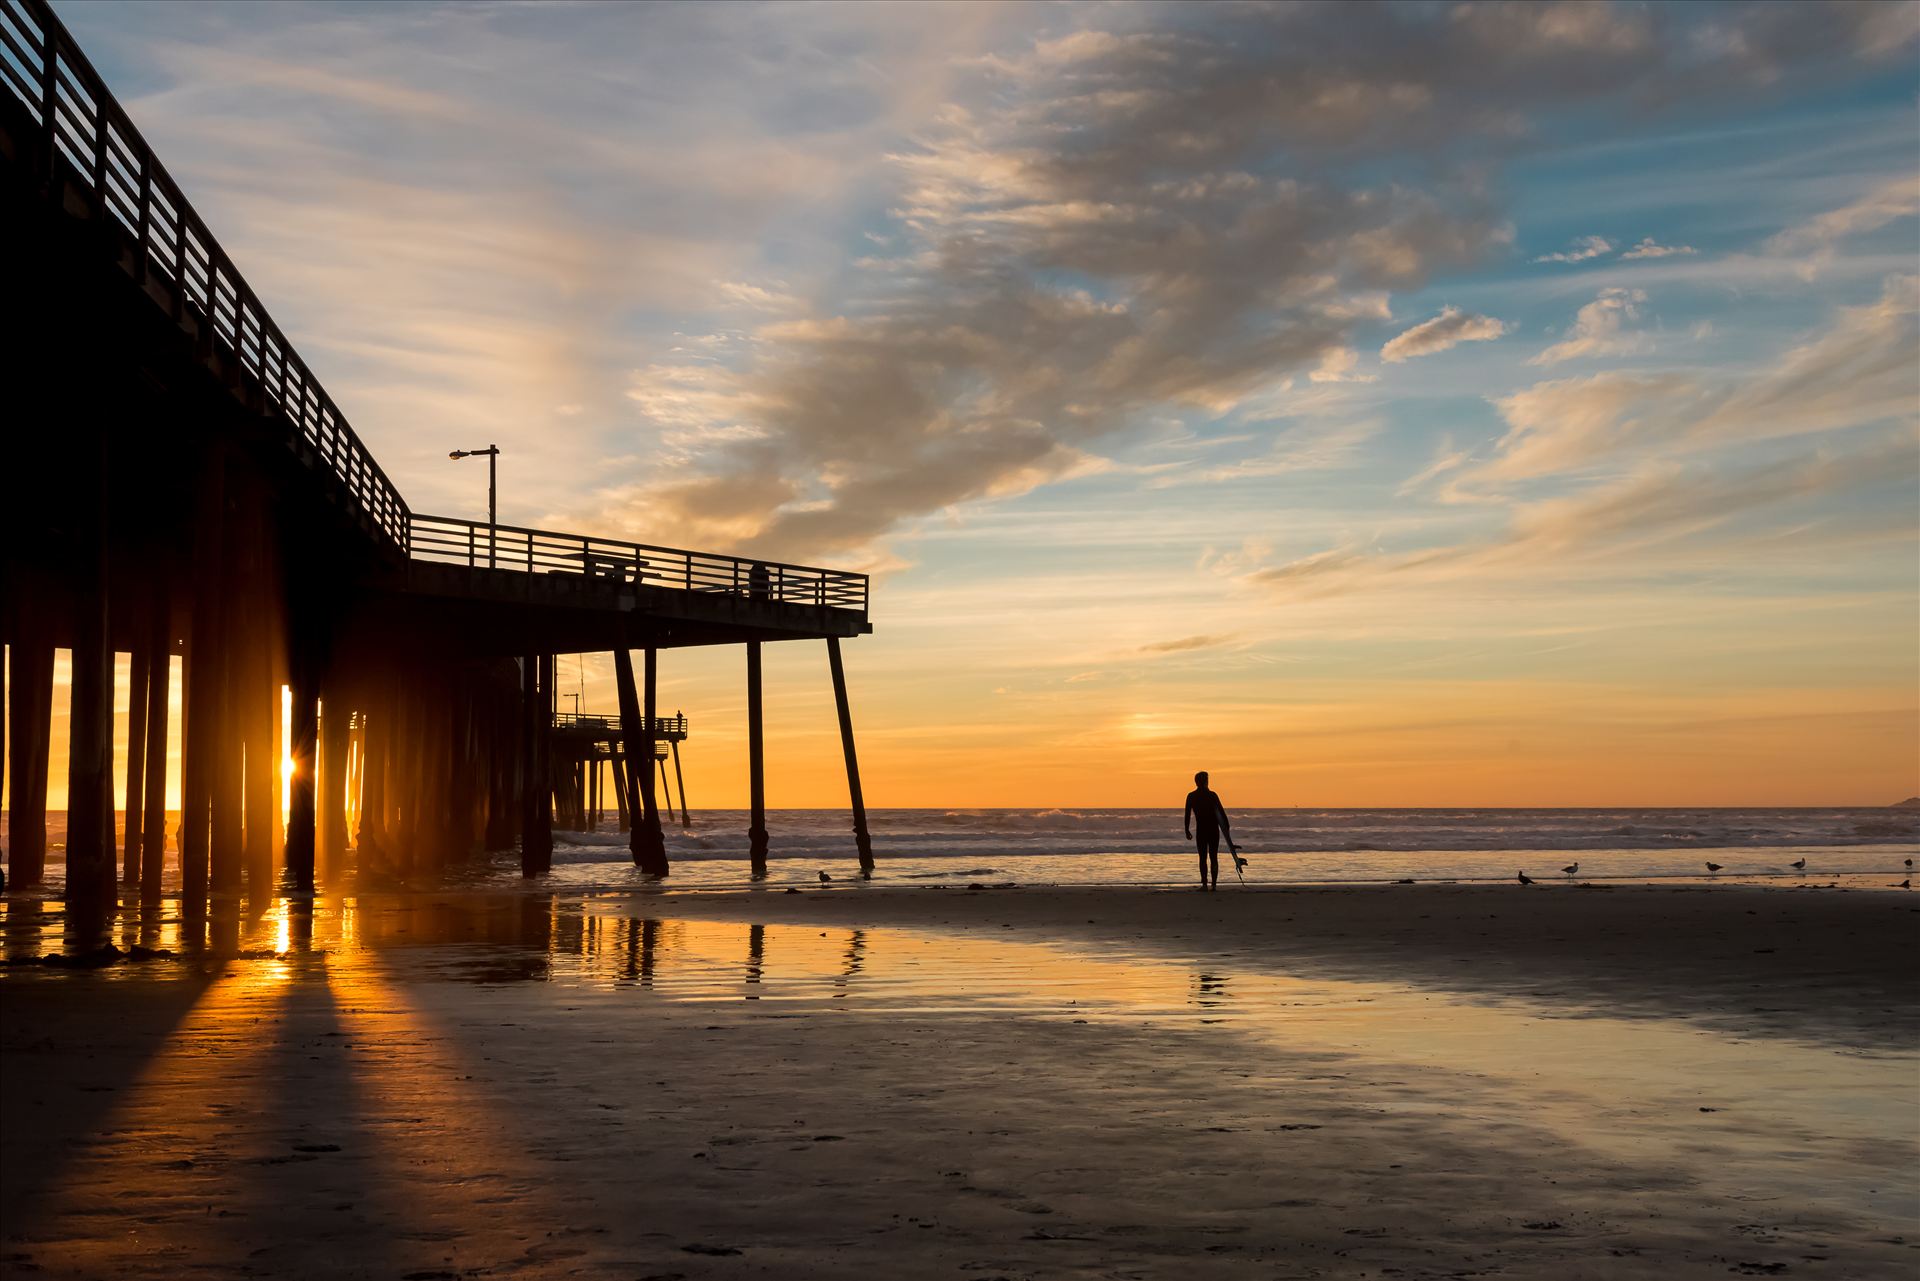 Sunset and the Surfer.jpg  by Sarah Williams